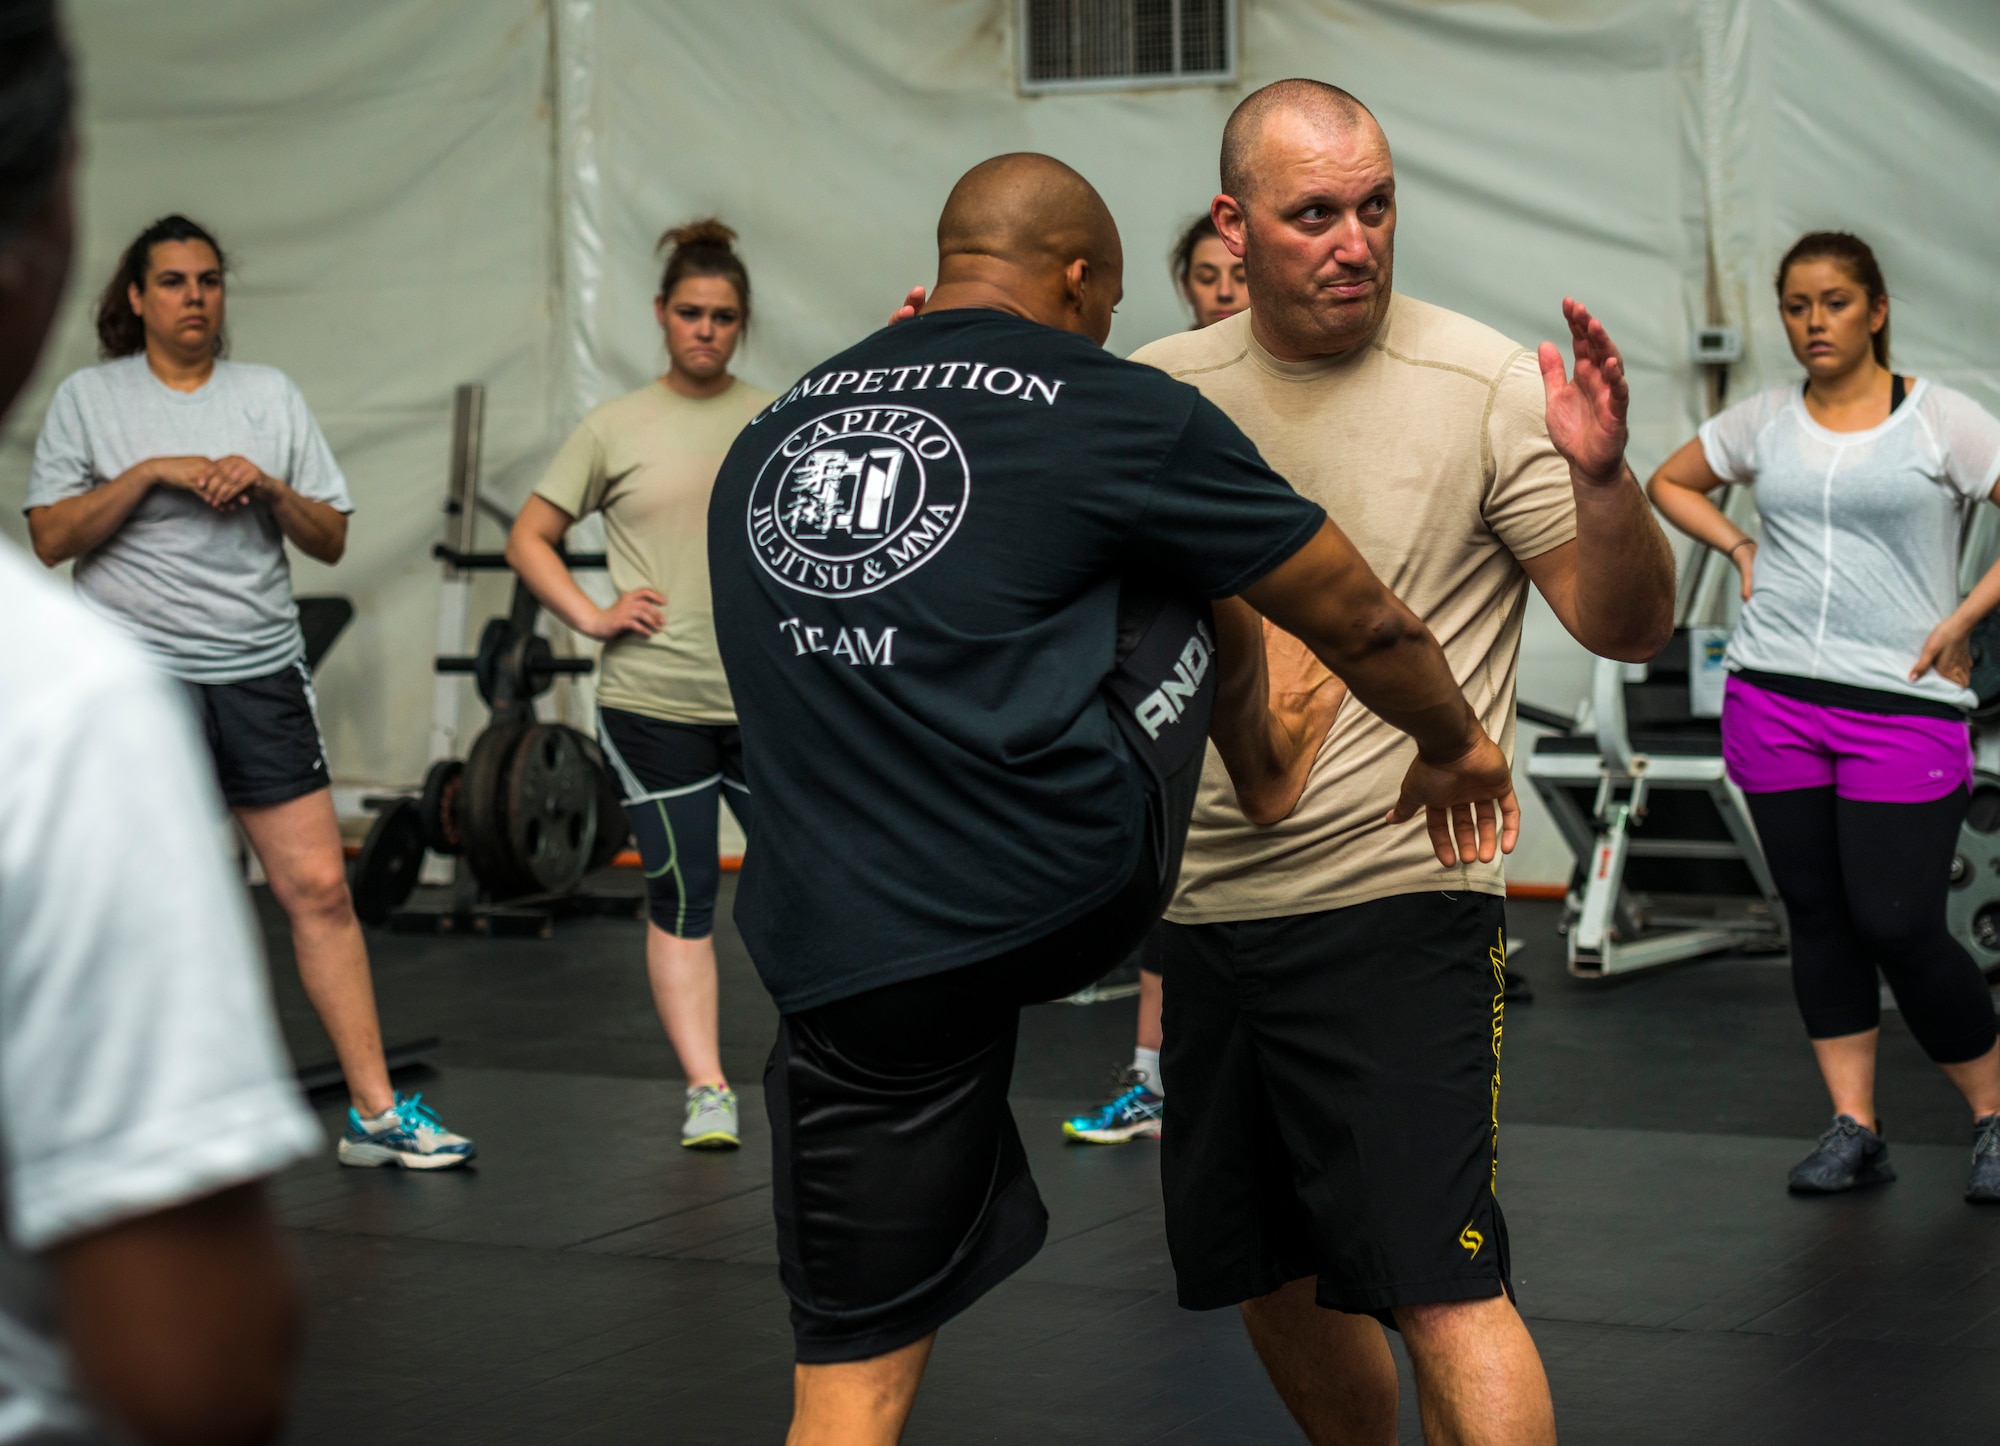 U.S. Air Force Staff Sgt. Cameron Cochran, 387th Expeditionary Security Forces Squadron assistant flight chief, demonstrates one way to push away an attacker during a self-defense class July 26, 2014 at an undisclosed location in Southwest Asia. The class was designed to better prepare Airmen if they are ever attacked. (U.S. Air Force photo by Staff Sgt. Jeremy Bowcock)